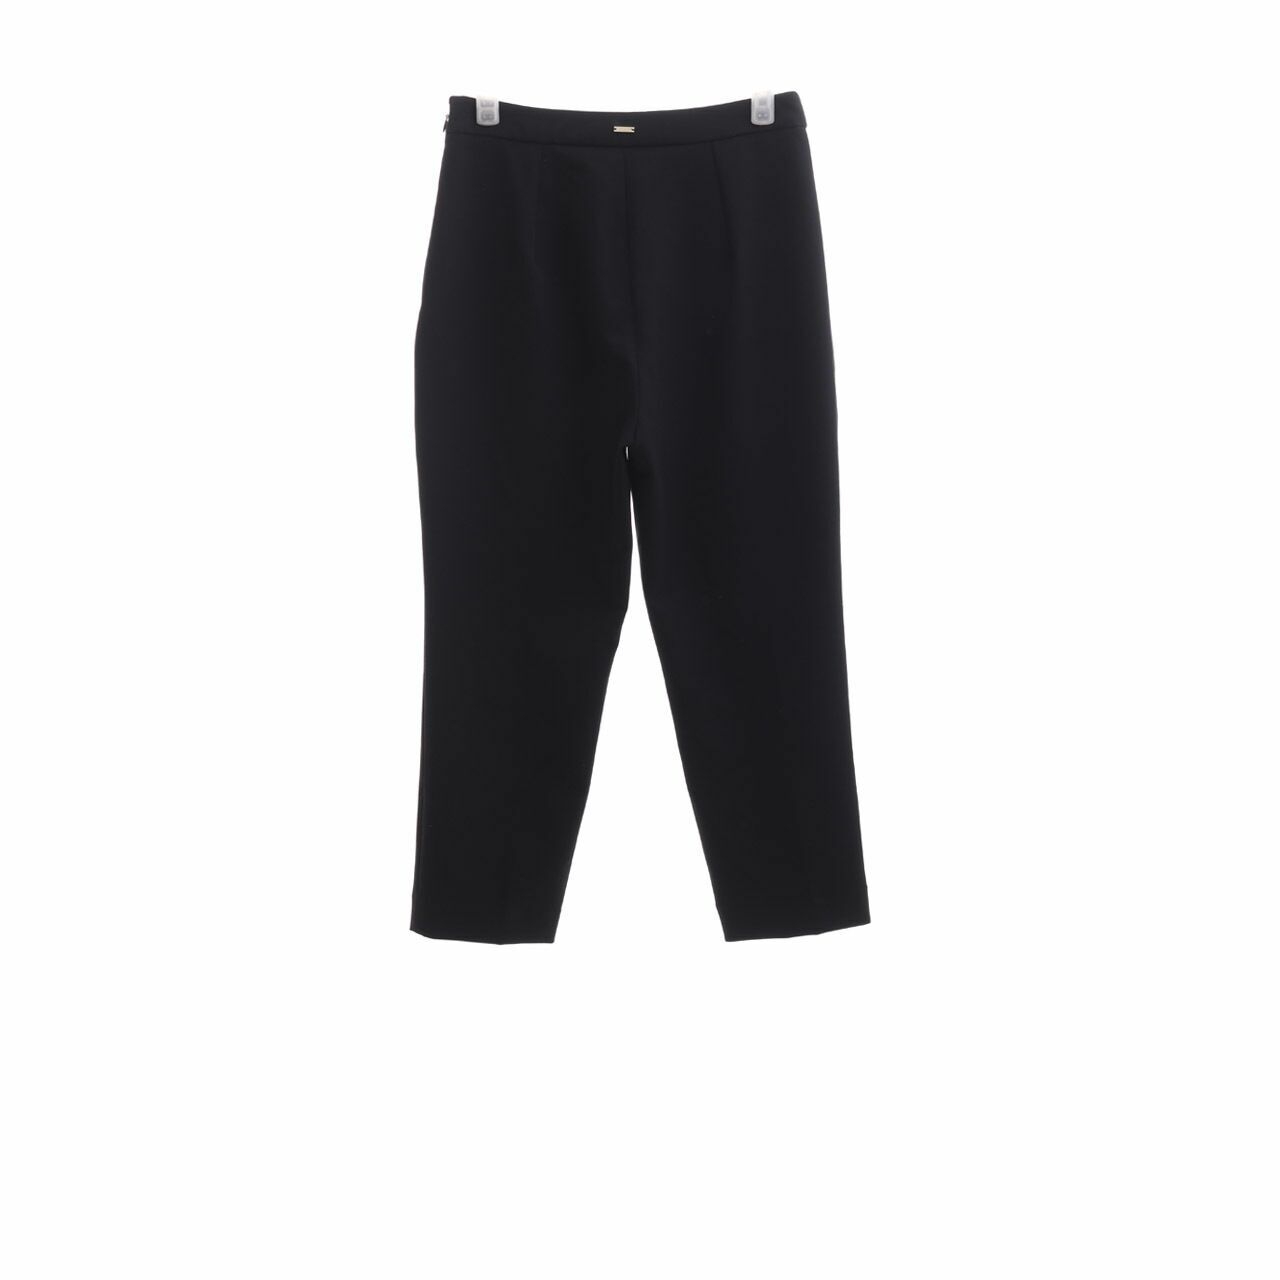 Marciano Black Trousers